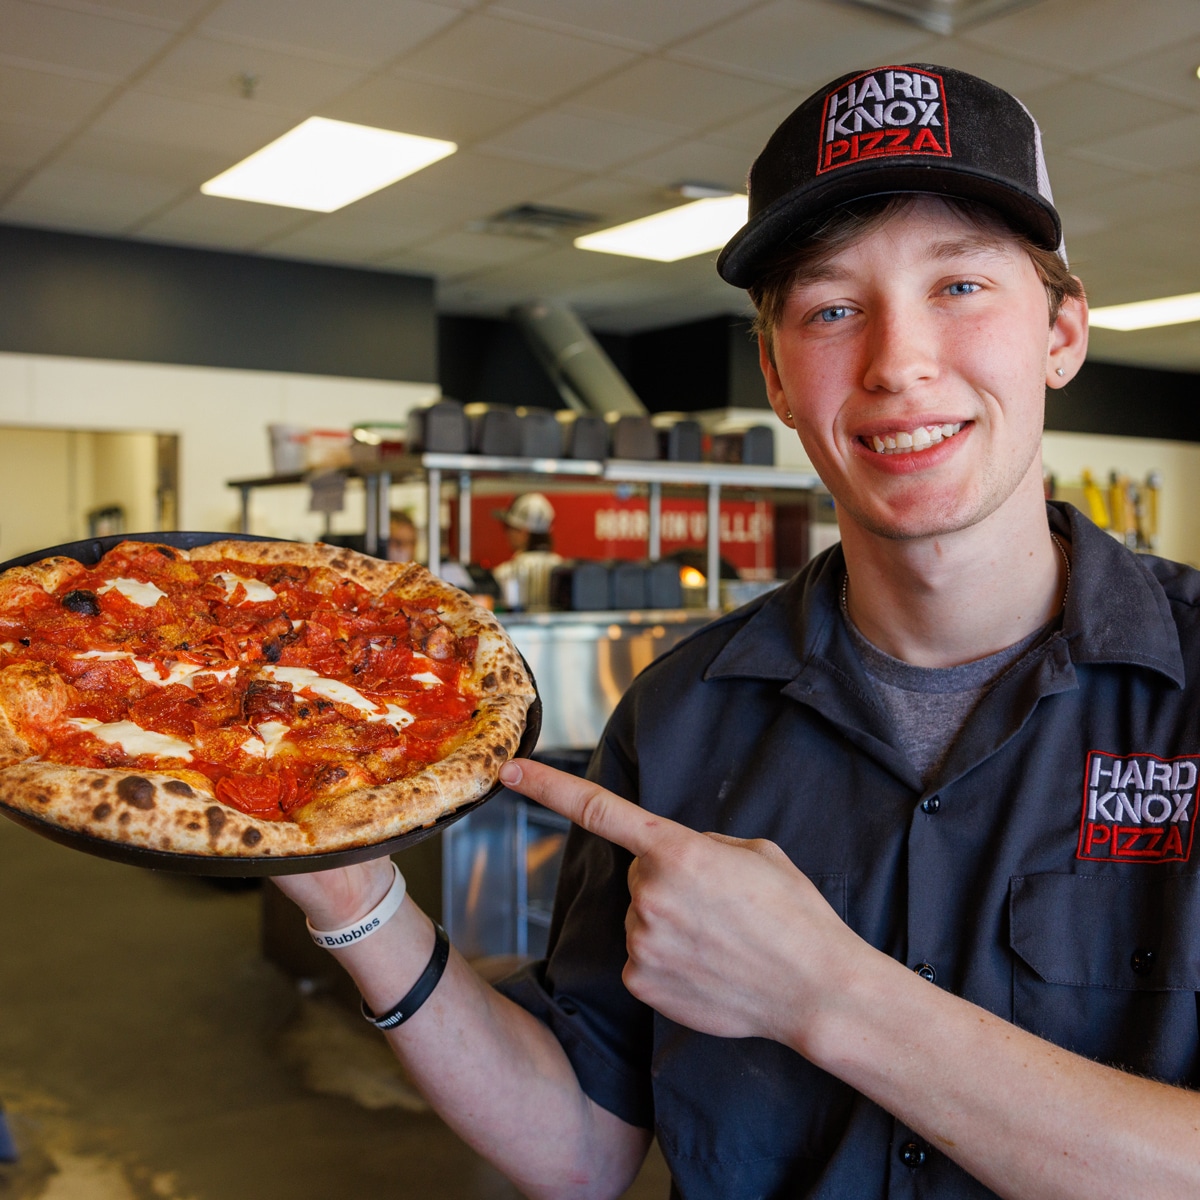 Hard Knox Pizza is voted one of Knoxville's Best Pizzas